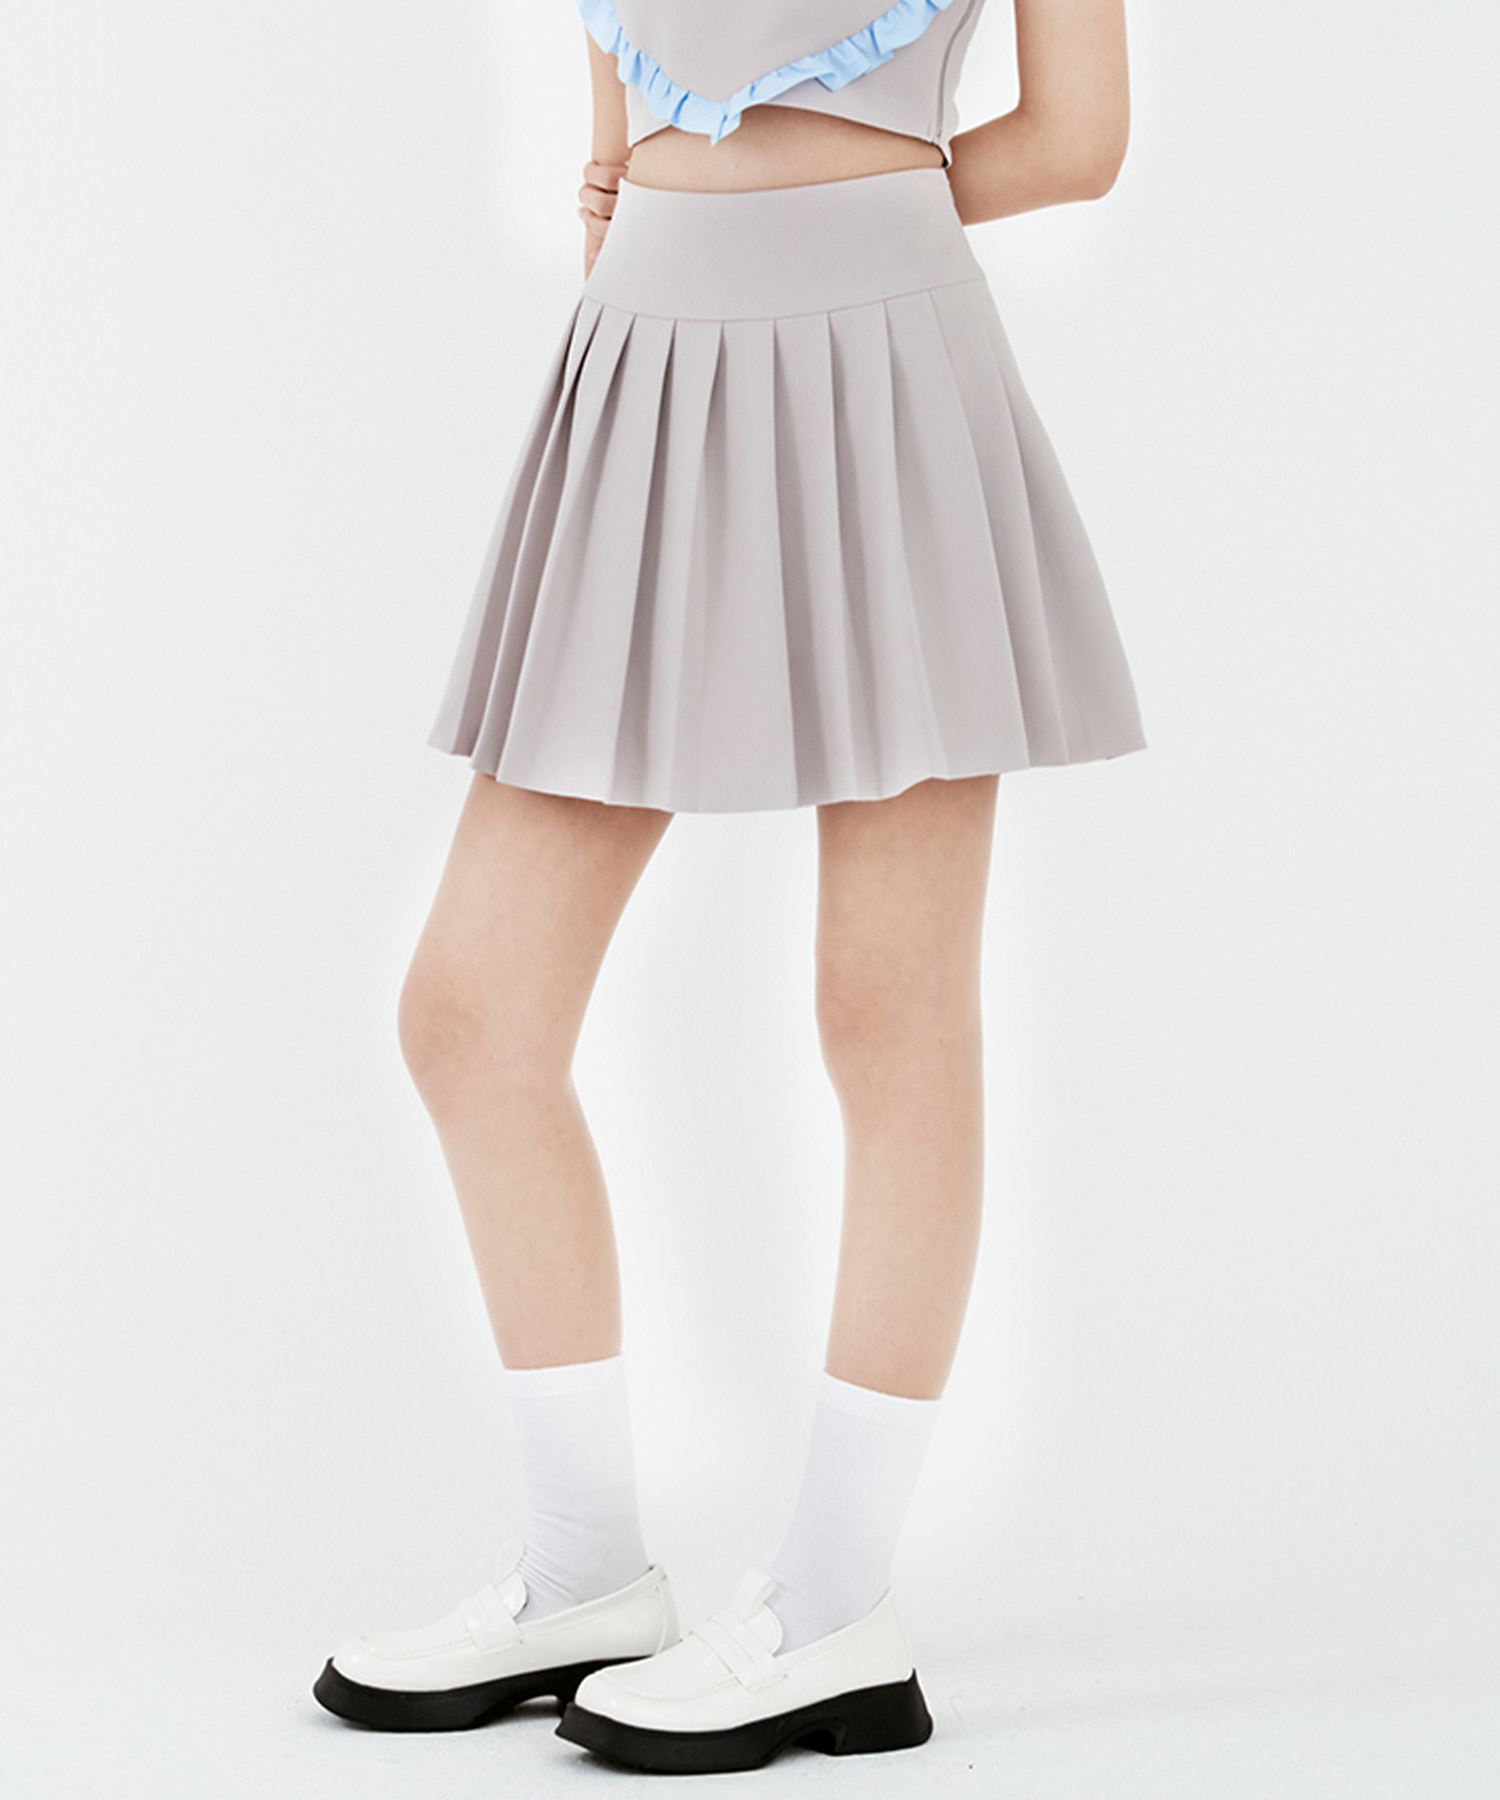 60822 HEART CLUBPleated Solid Tone Skirt